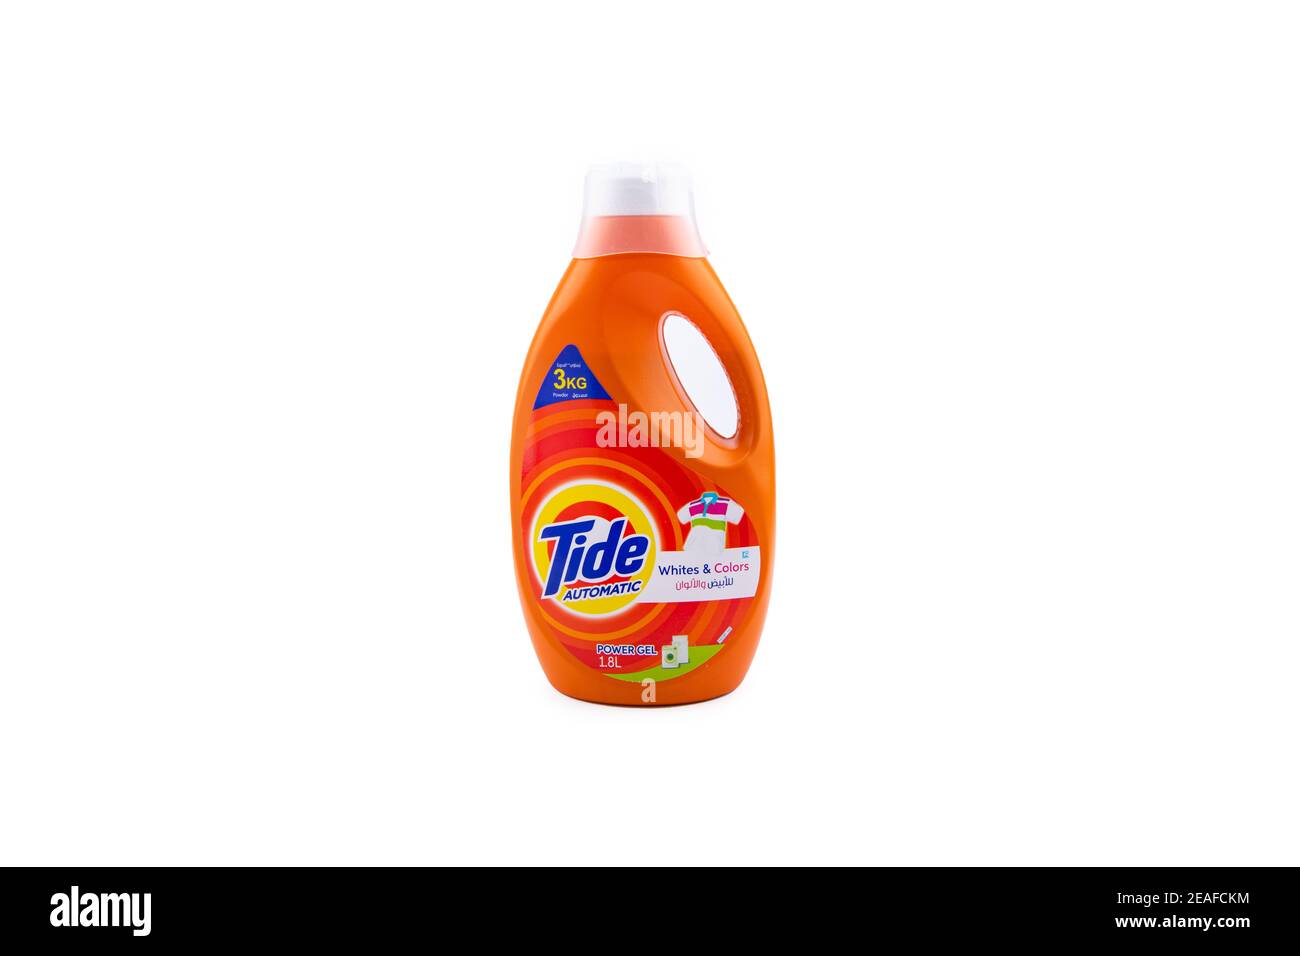 Tide automatics gel bottle on isolated background. hygiene products for washing cloth Stock Photo